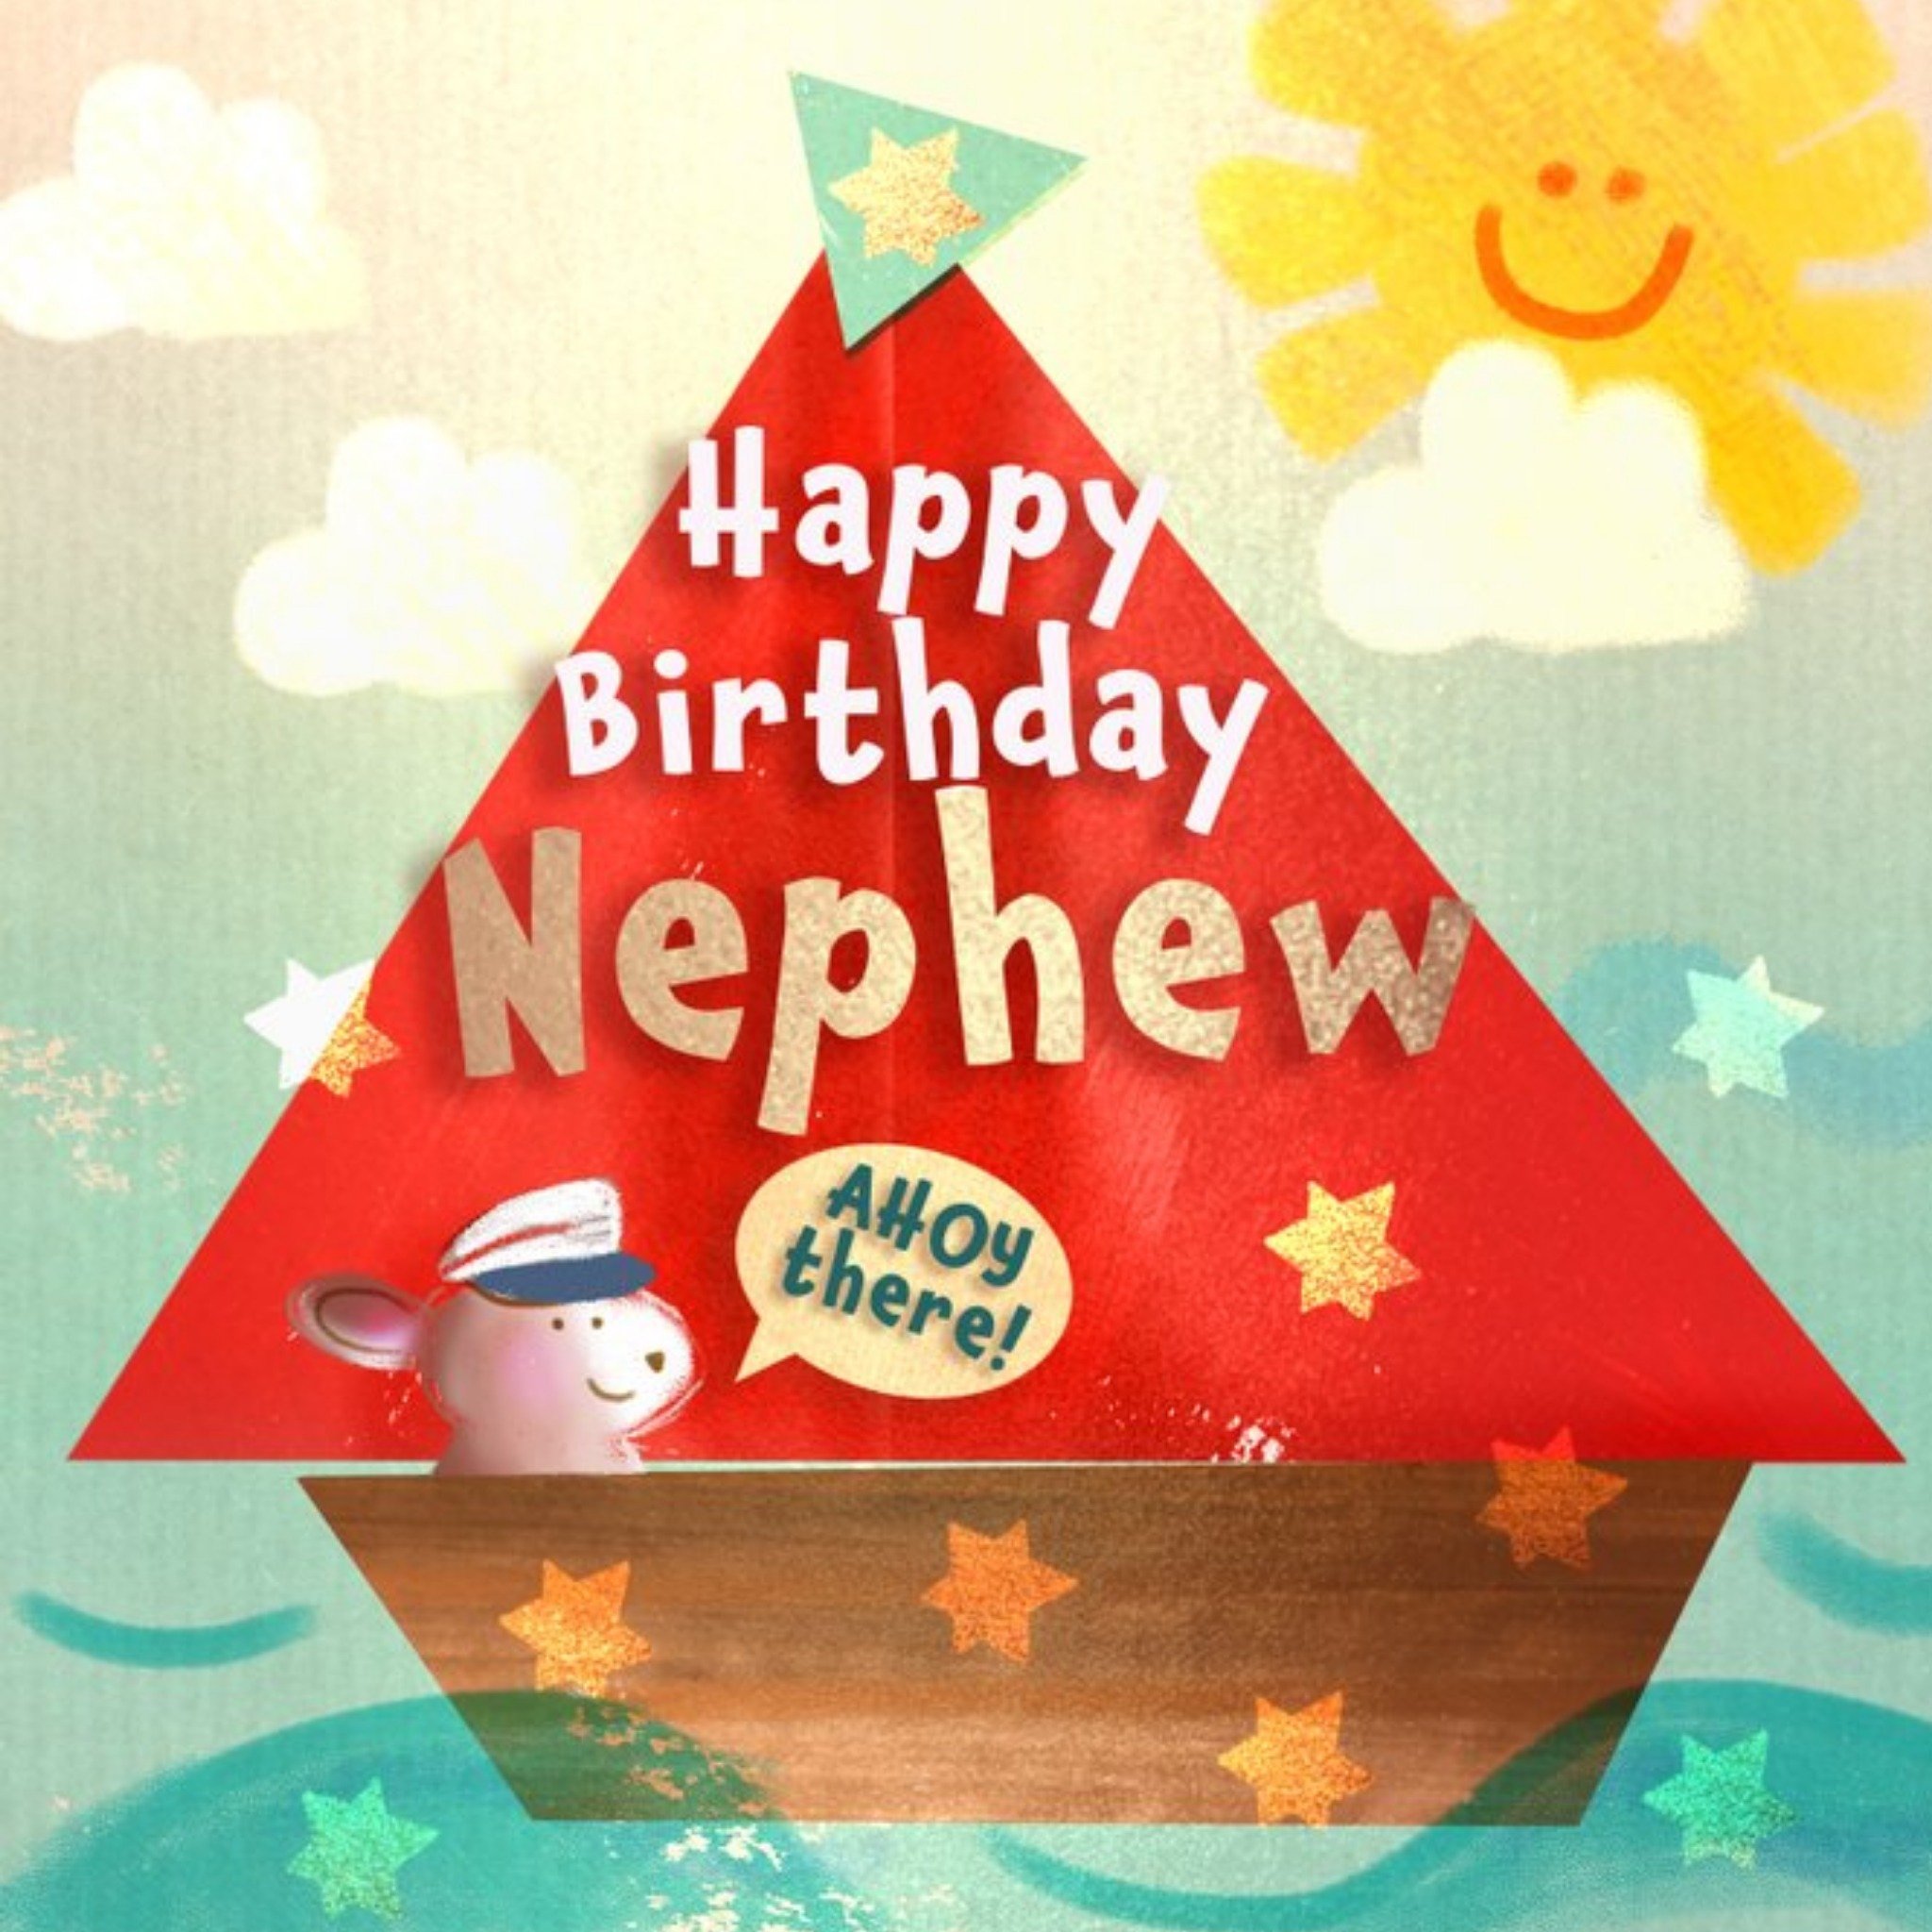 Mickey Mouse Mouse In Boat Happy Birthday Nephew Card, Square